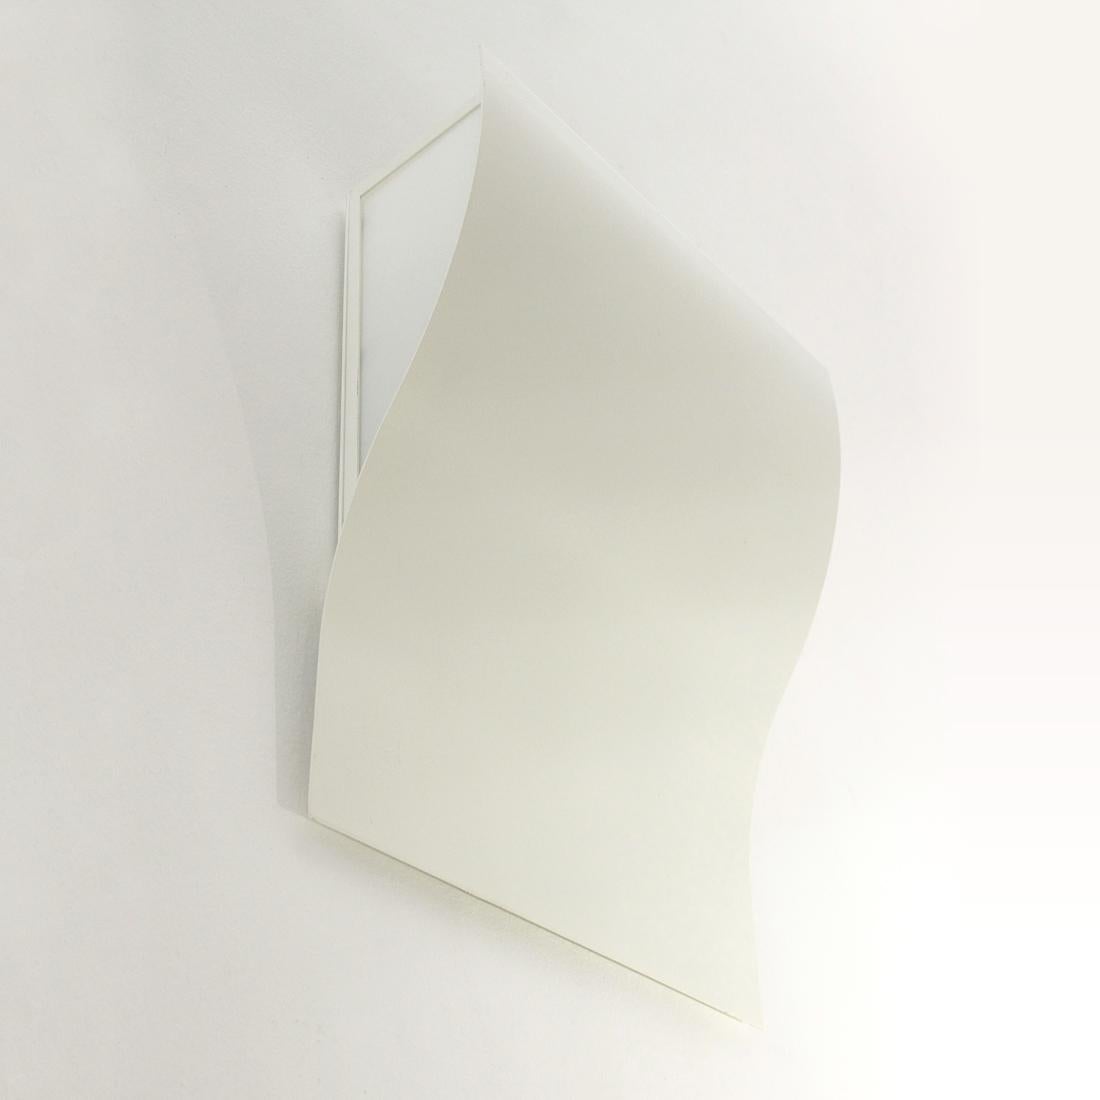 'Moki' wall lamp by Eugenio and Andrea Pamio for Oty Light, 2000s For Sale 5